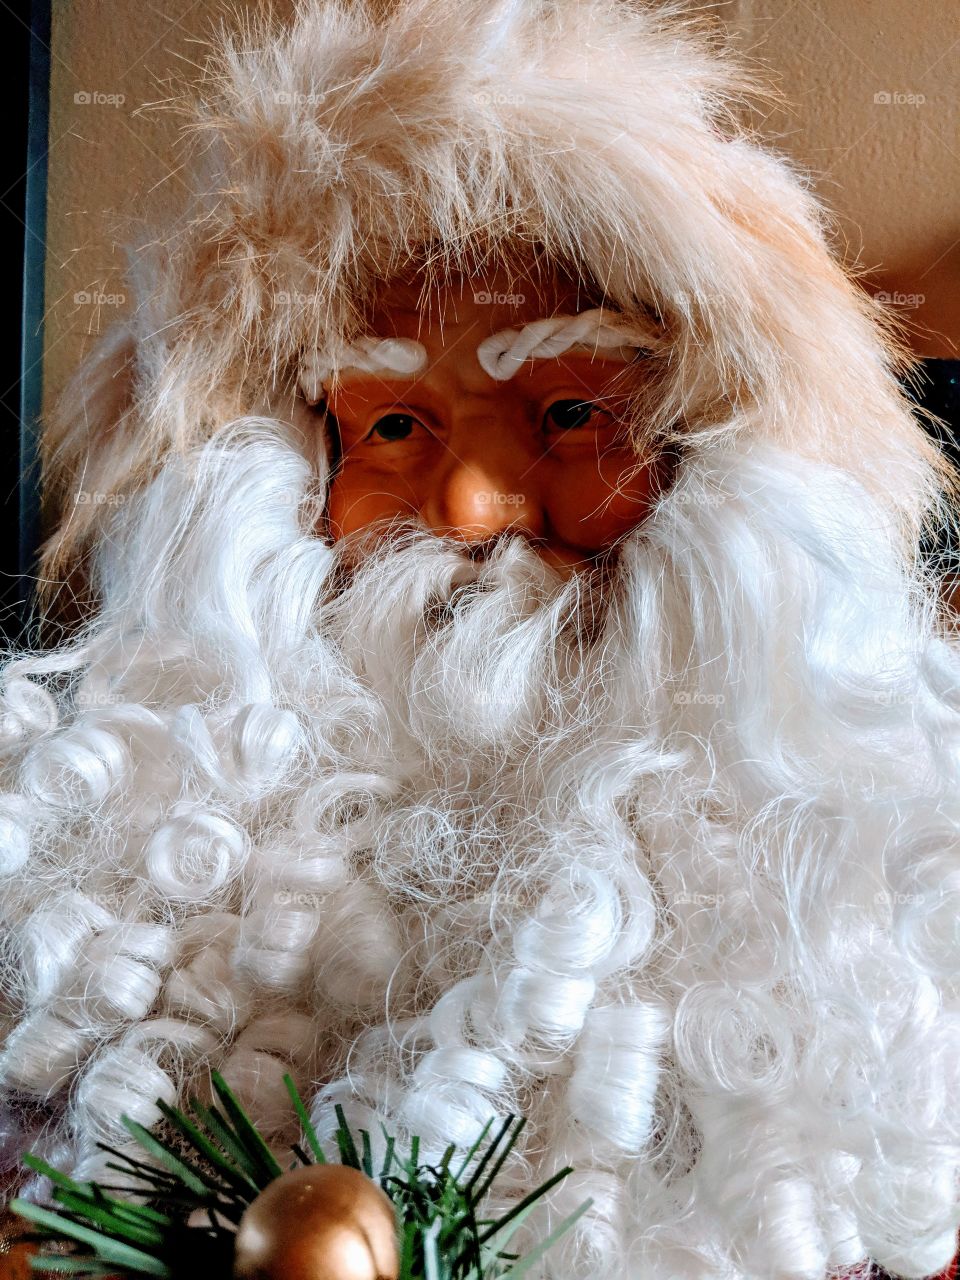 He sees you while you're sleeping. Christmas is a time for caring.